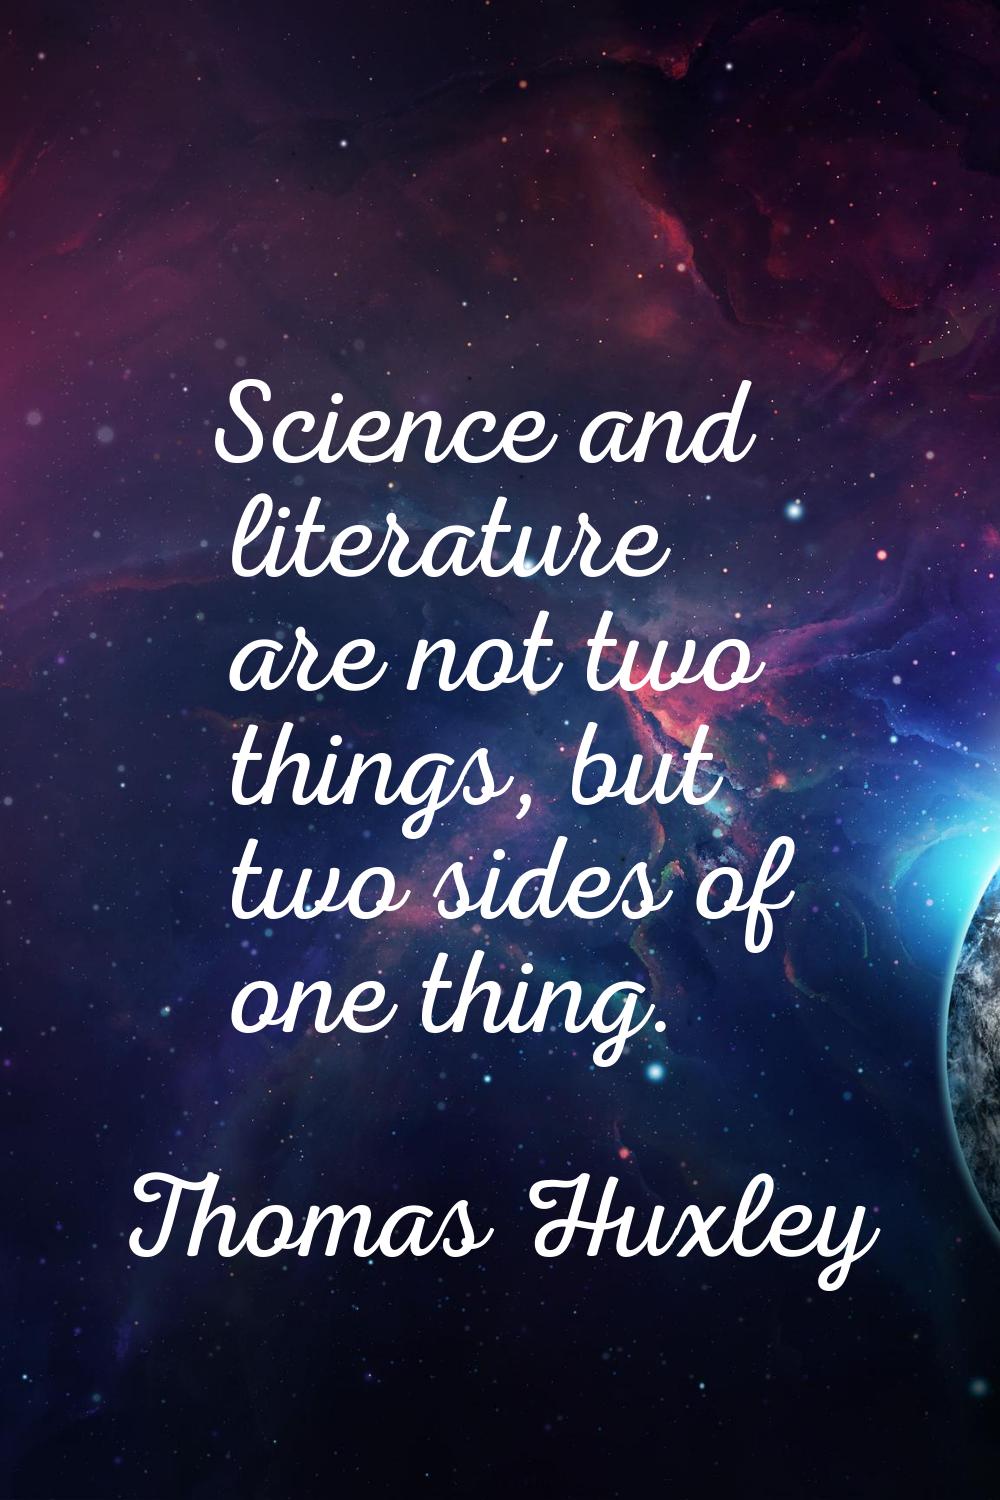 Science and literature are not two things, but two sides of one thing.